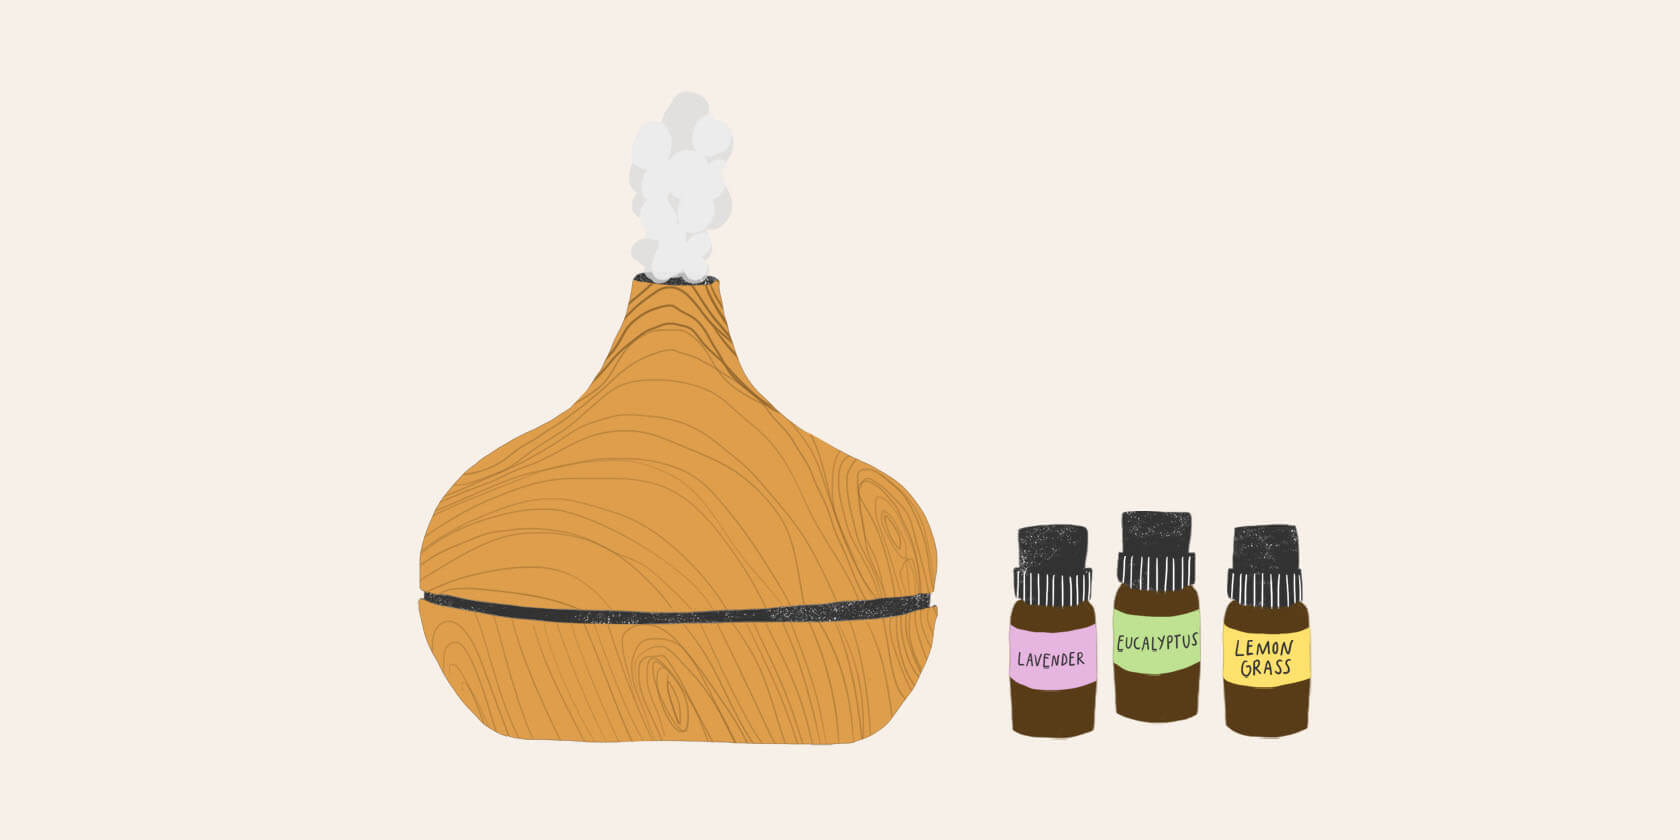 An illustration of essential oils and a humidifier.